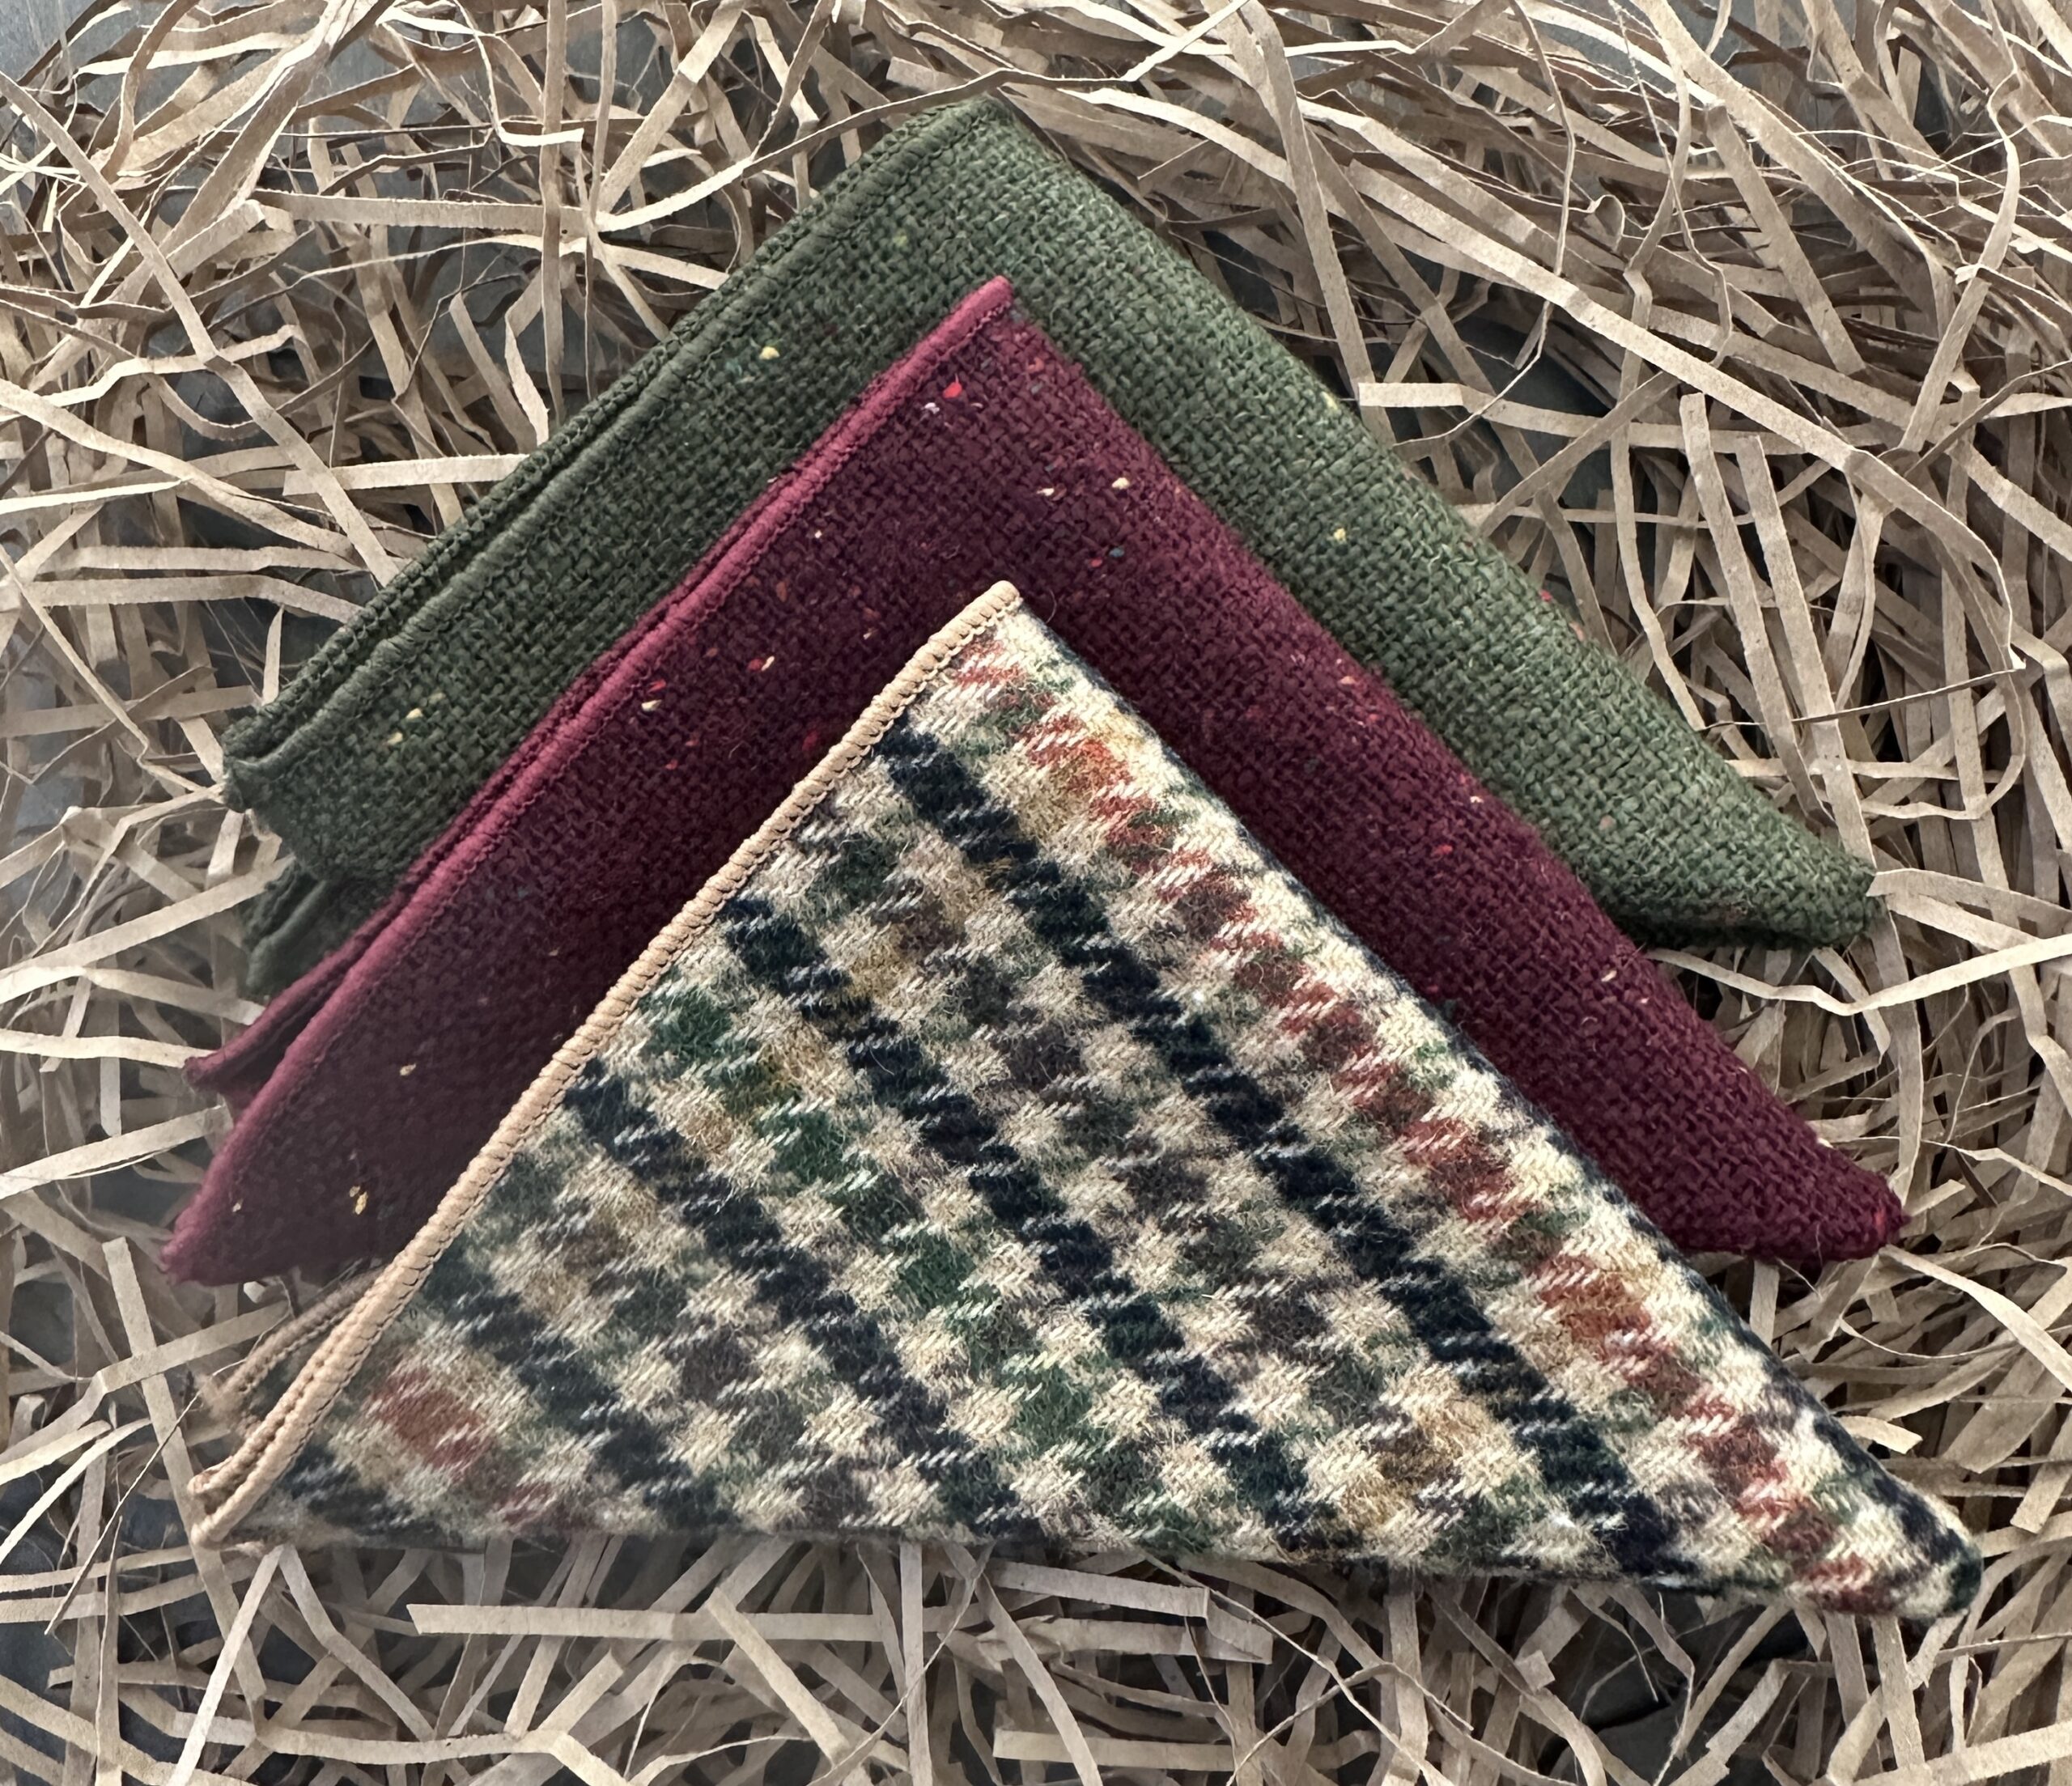 A set of three woolen pocke handkerchiefs for mens and grooomsmen gifts. THe handkerchiefs are in a red and green flecked fabric and a check pattern